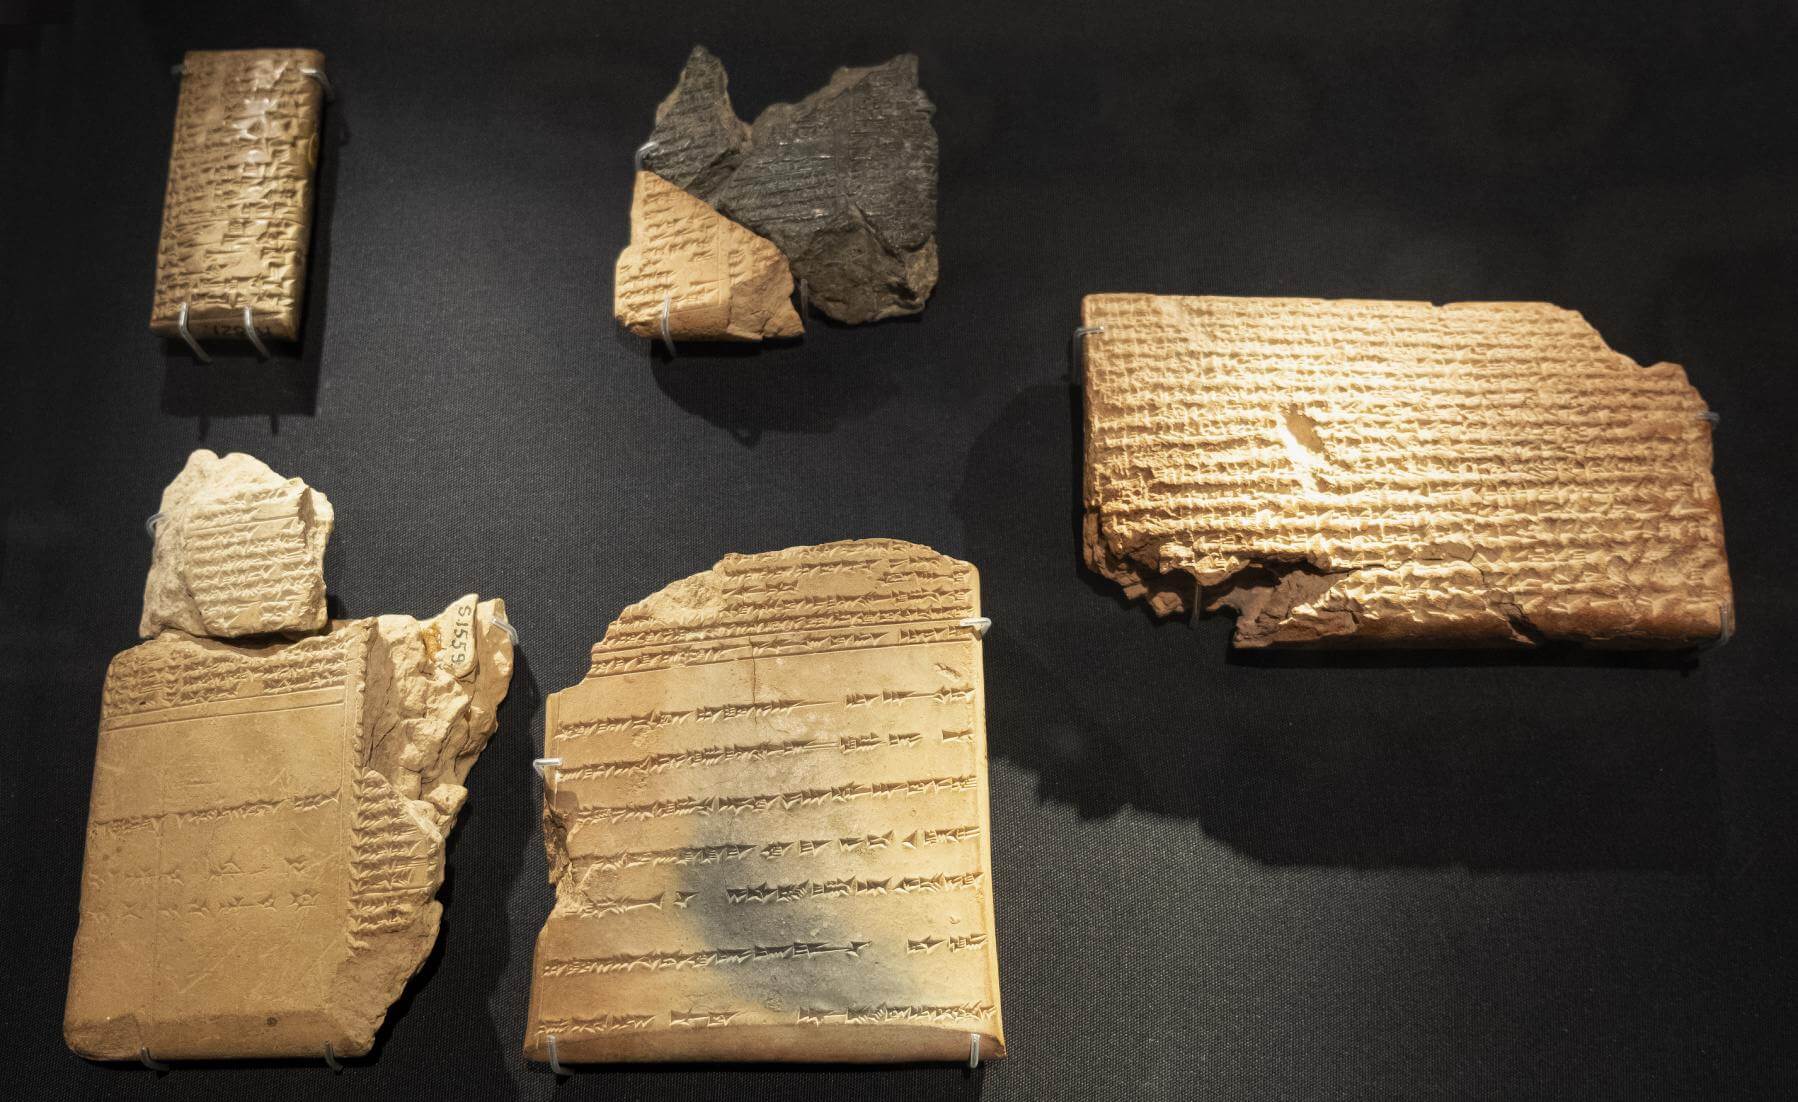 Ancient Assyrian clay tablets from king Ashurbanipal royal library at the archaeological exposition in British Museum in London. ©Image Credit: Bernard Bialorucki | Dreamstime (ID 175741942)